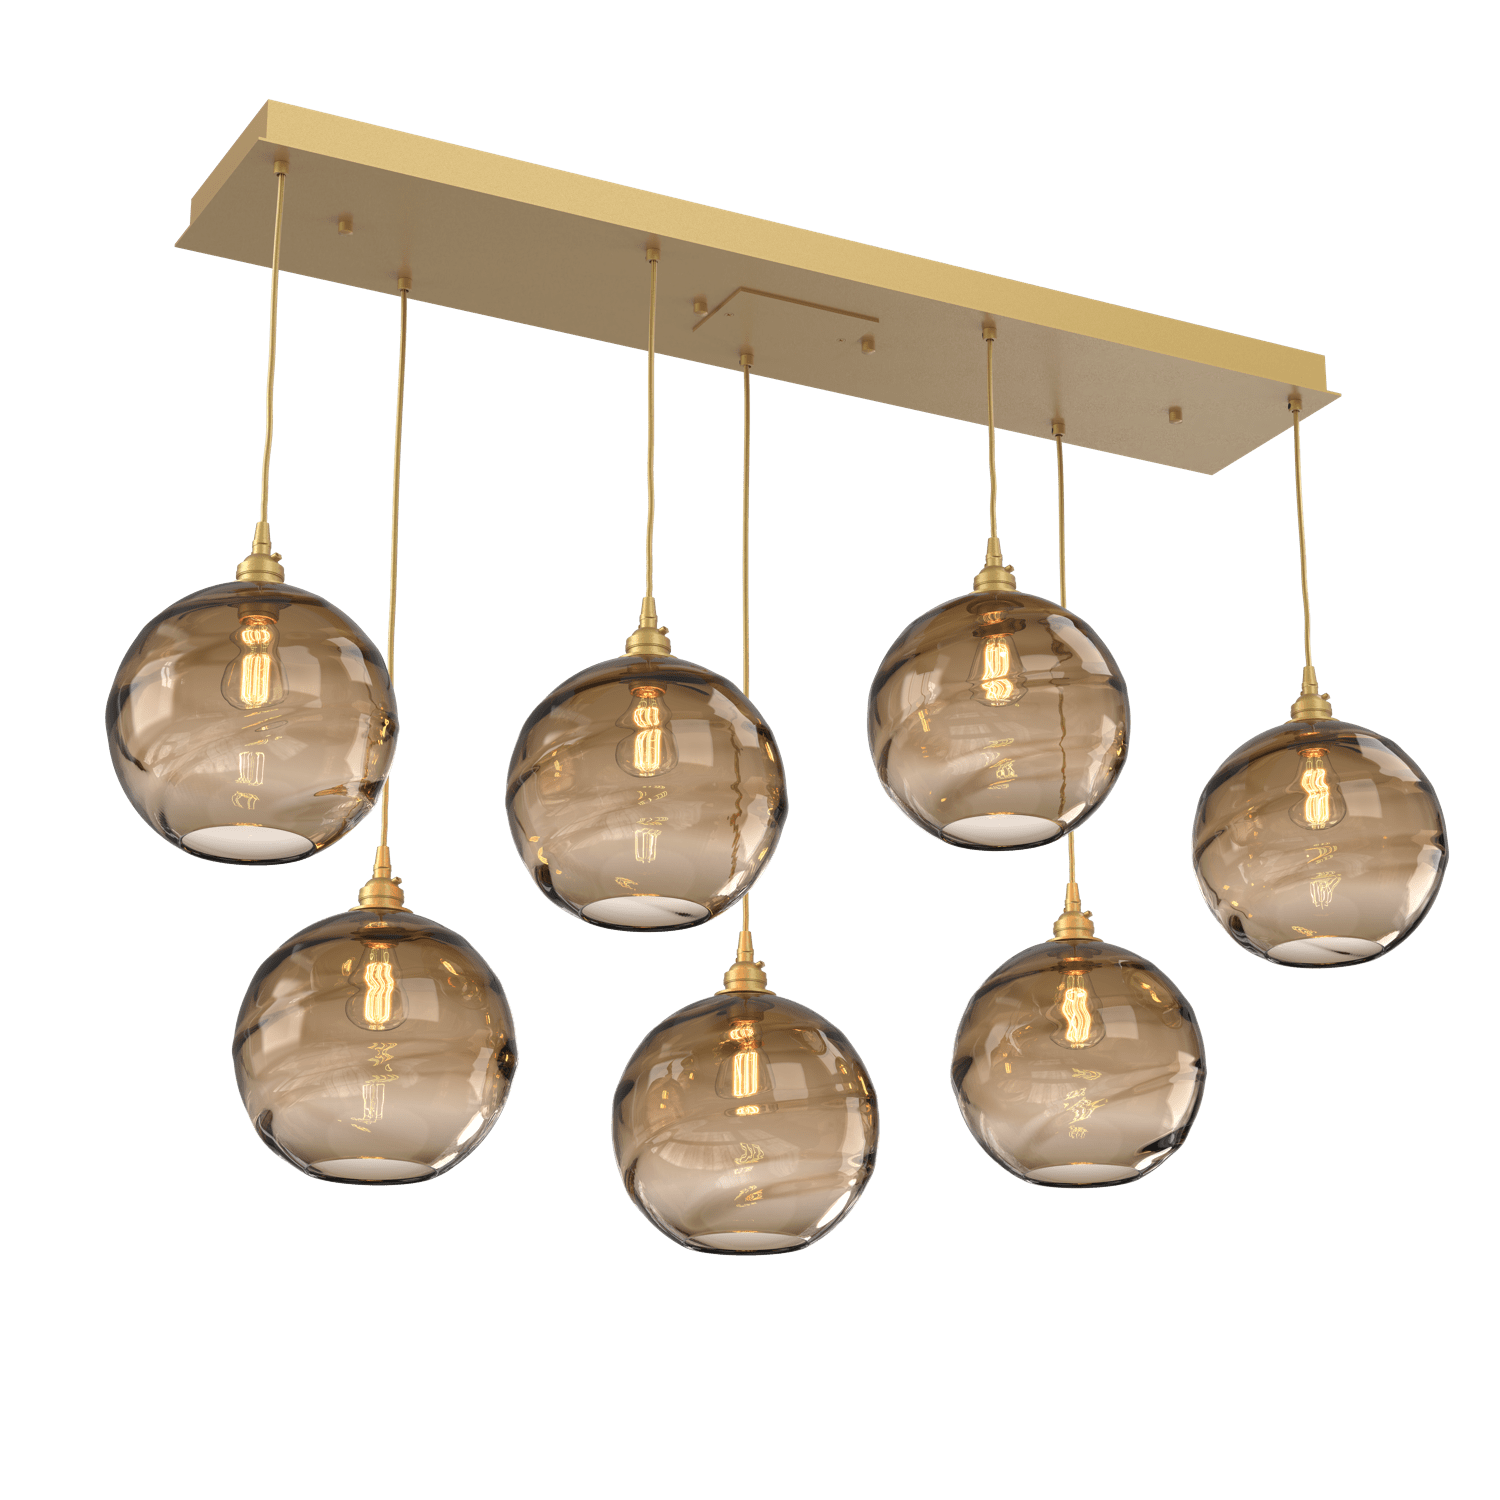 PLB0047-07-GB-OB-Hammerton-Studio-Optic-Blown-Glass-Terra-7-light-linear-pendant-chandelier-with-gilded-brass-finish-and-optic-bronze-blown-glass-shades-and-incandescent-lamping